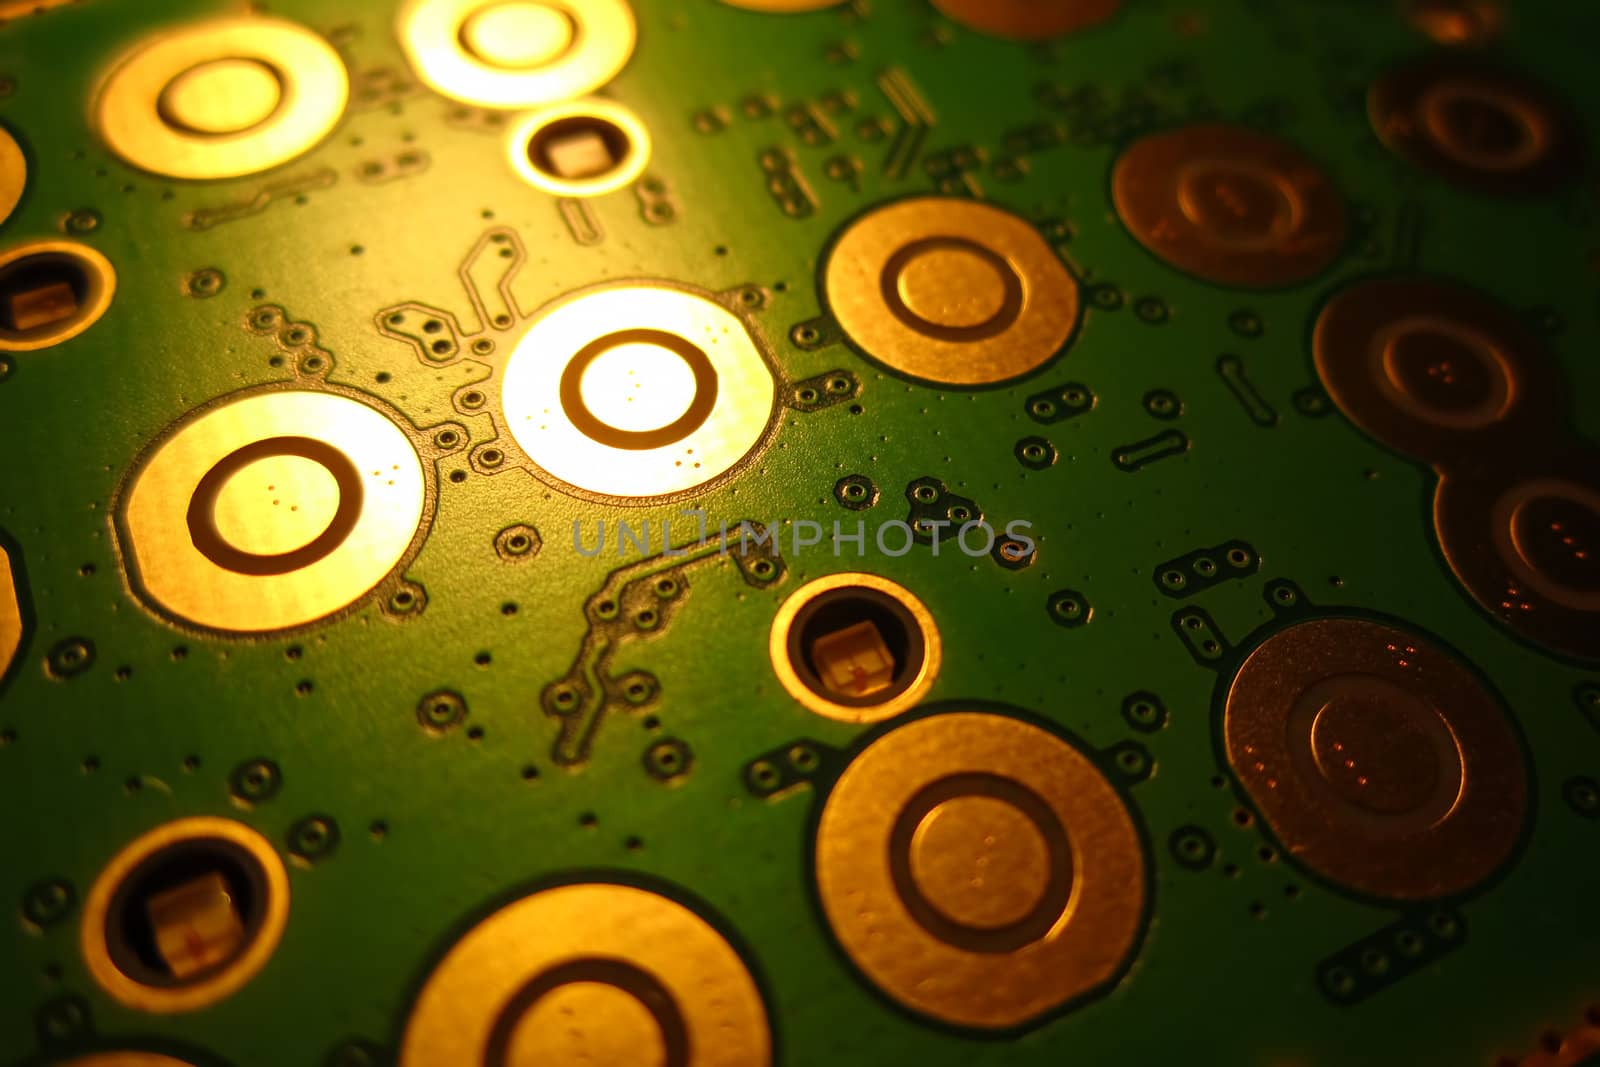 Circuit board by Nickondr